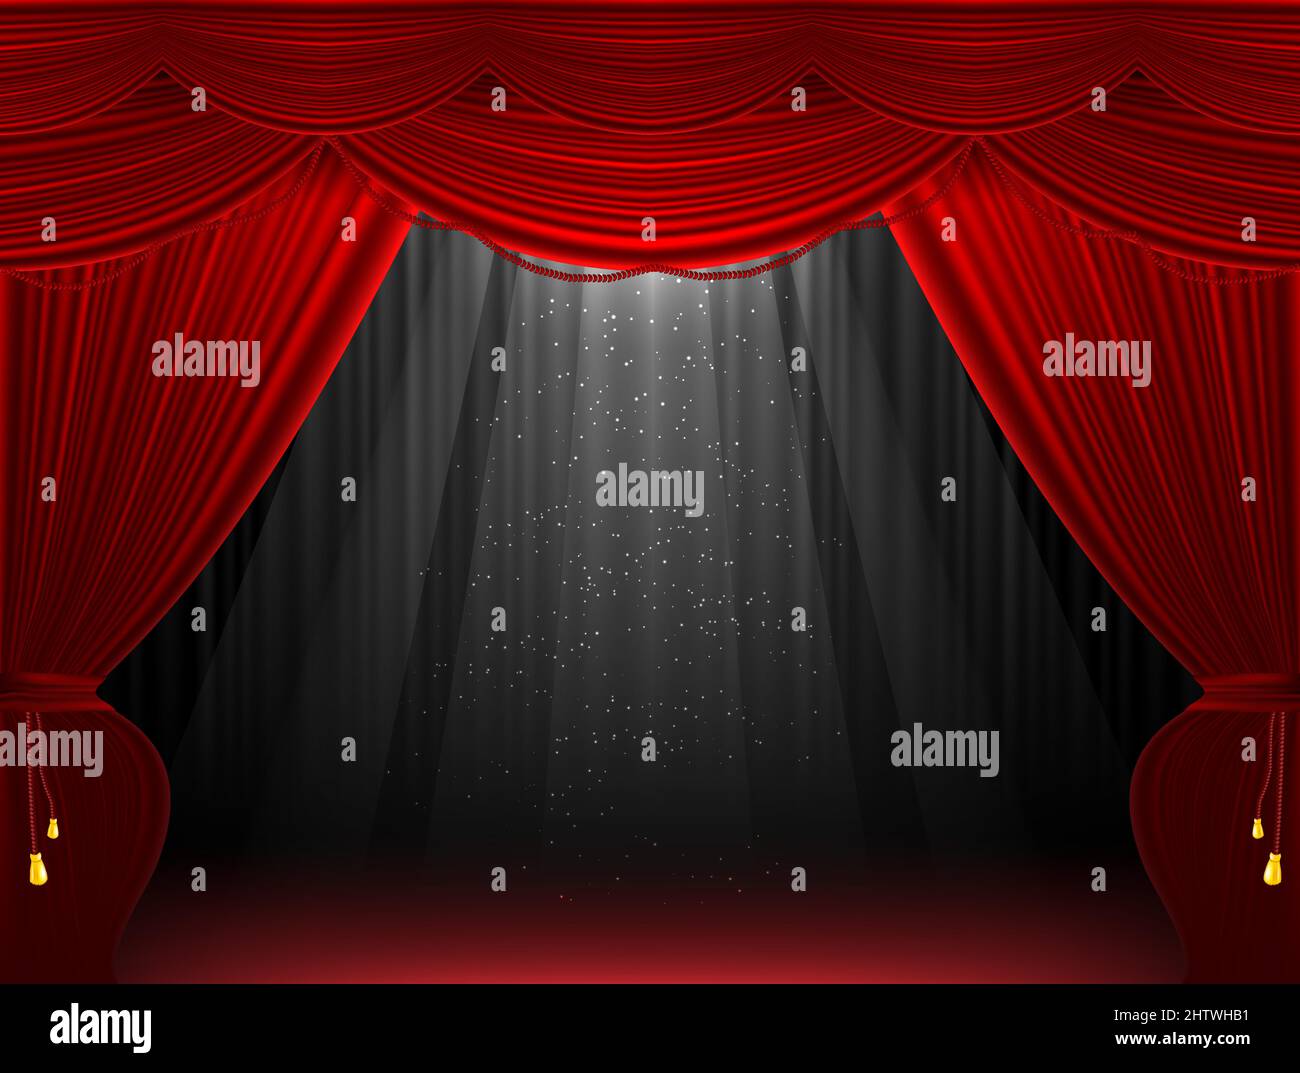 Red stage curtain illustration background. Stock Vector